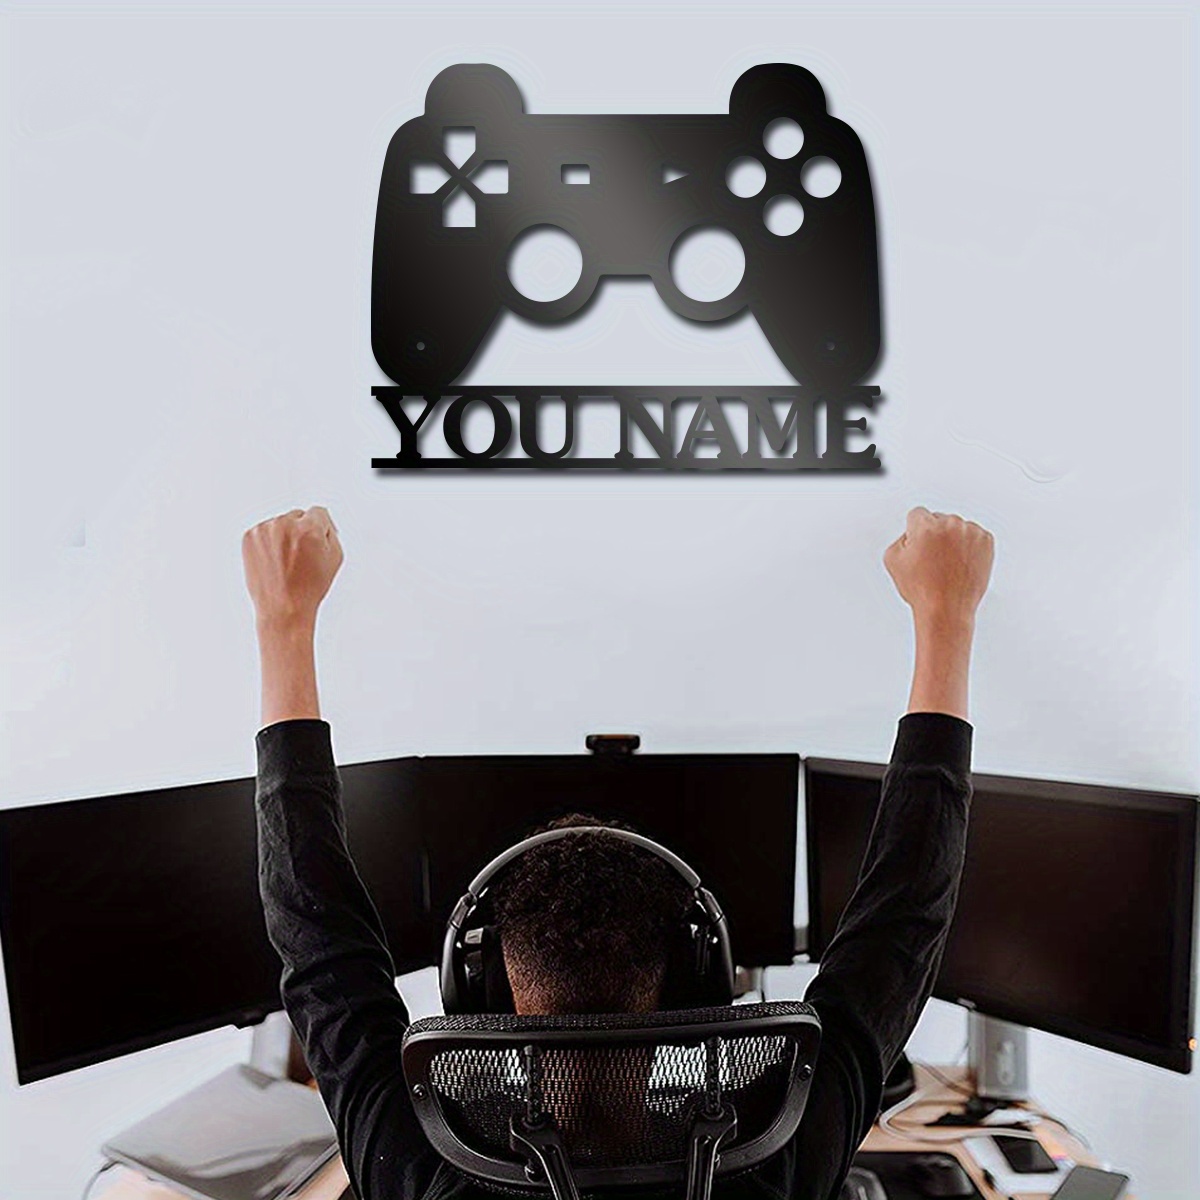 

1pc Custom Video Game Controller Metal Wall Art, Personalized Gamer Name Sign Decoration For Room, Game Room Metal Decor, For Home Room Living Room Office Decor